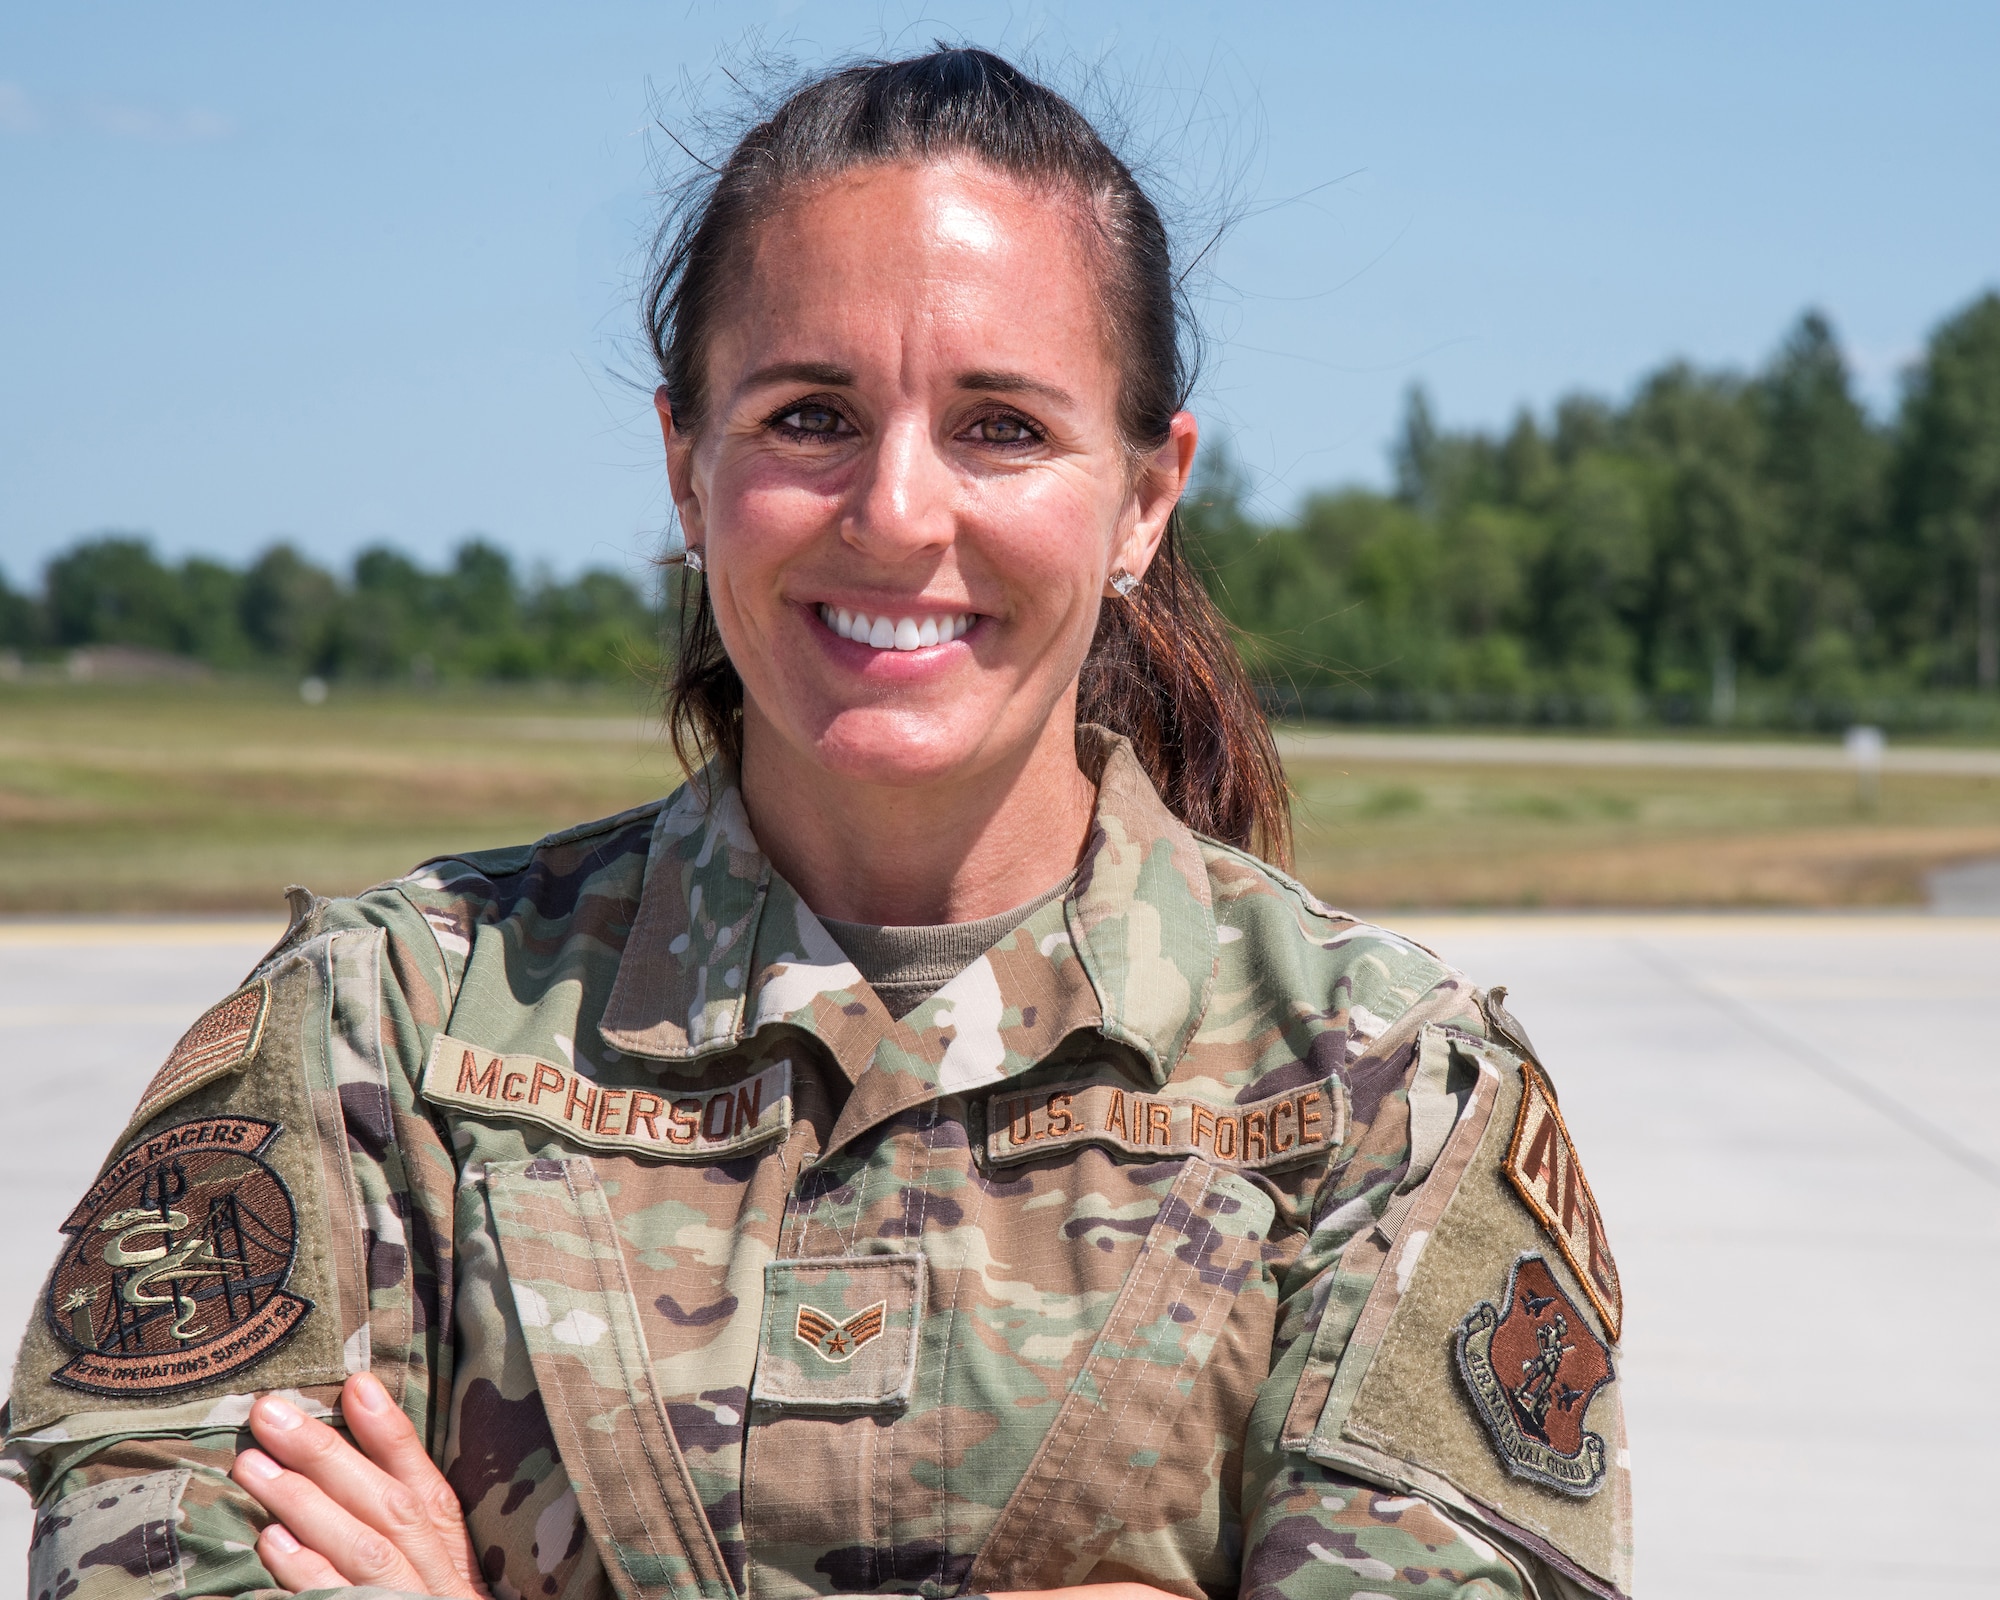 Female Airman wearing fatigues poses with crossed arms in front on a concrete flight line, forest trees in the background.